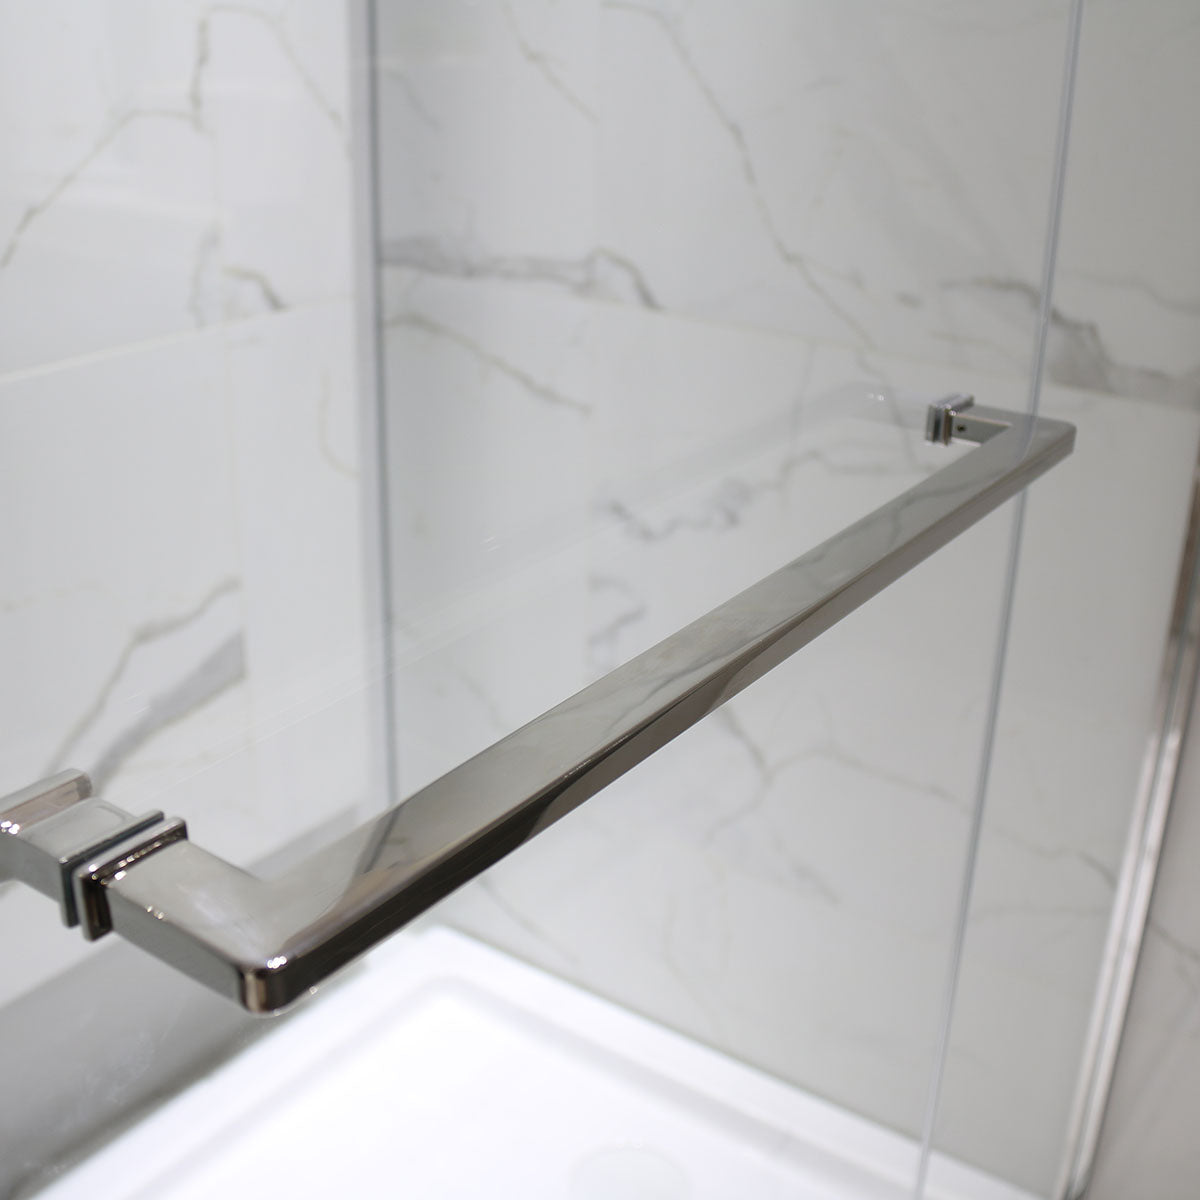 NPH Hinge Shower Door Closed Against Return Panel  with Klearteck Treatment (3/8" Thickness) (Chrome) - iStyle Bath